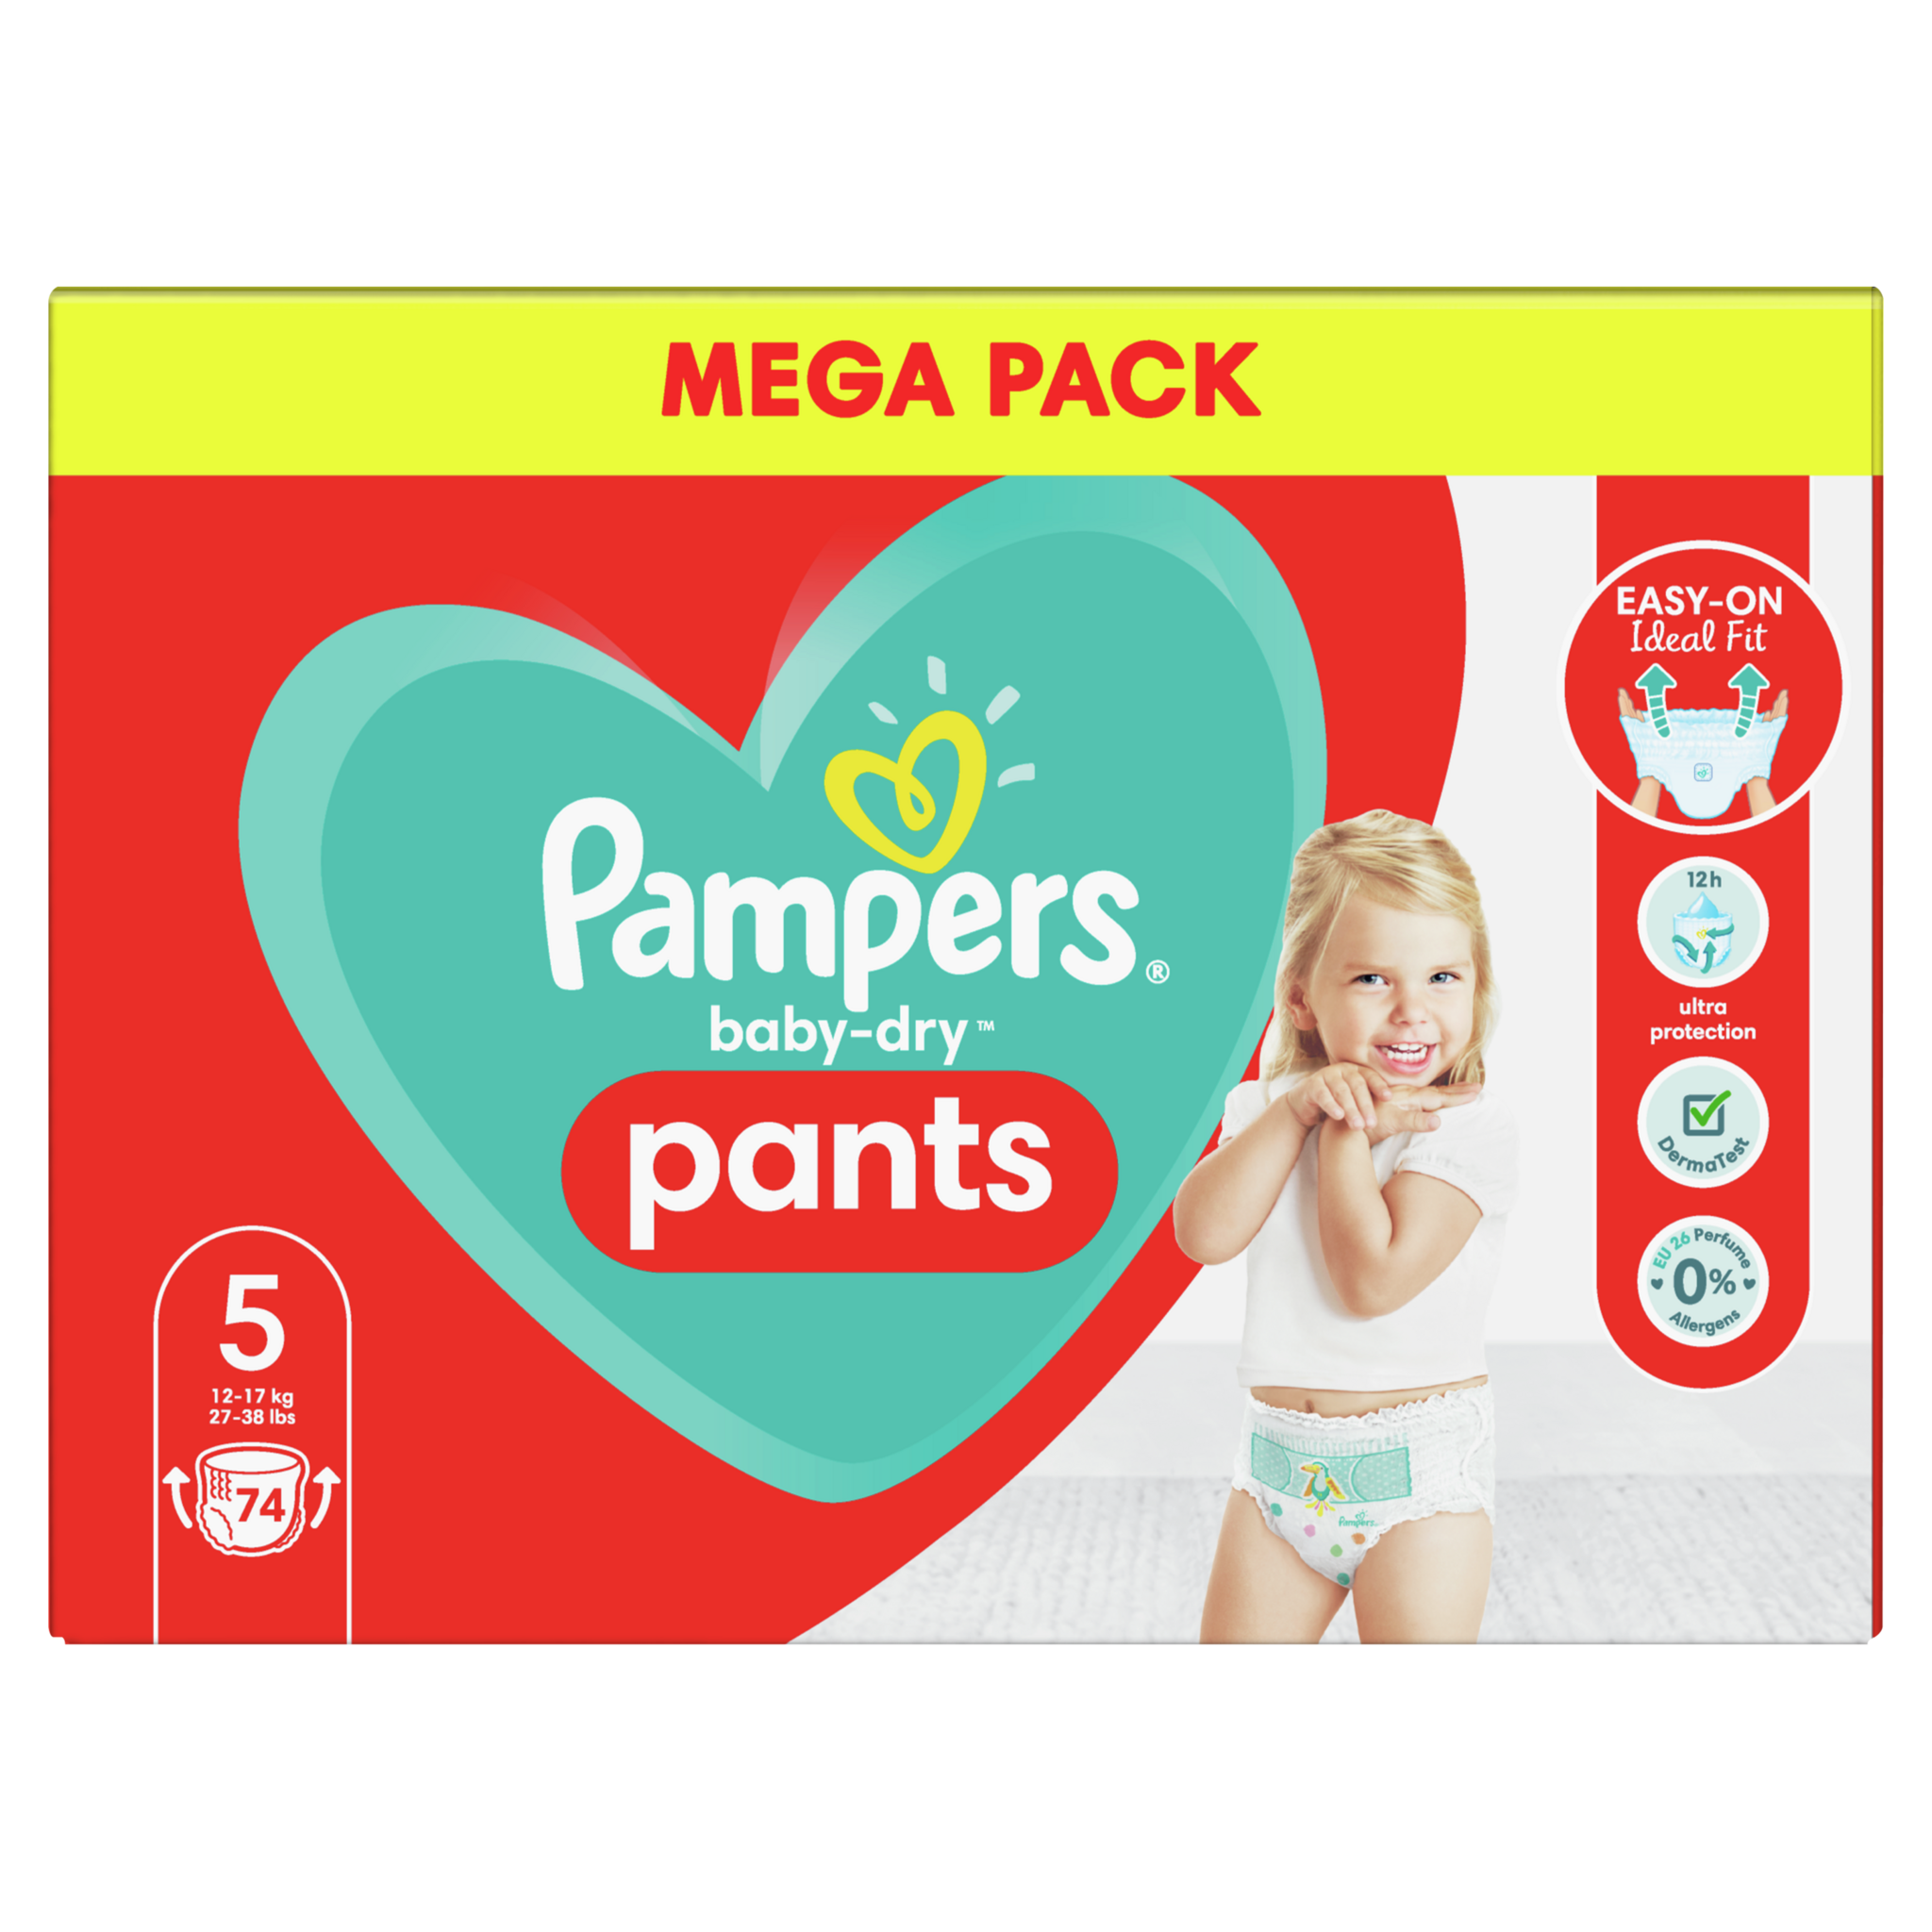 Pampers - Couches-culottes Pants, taille 7, 17+ kg, Mega Pack 74 pcs